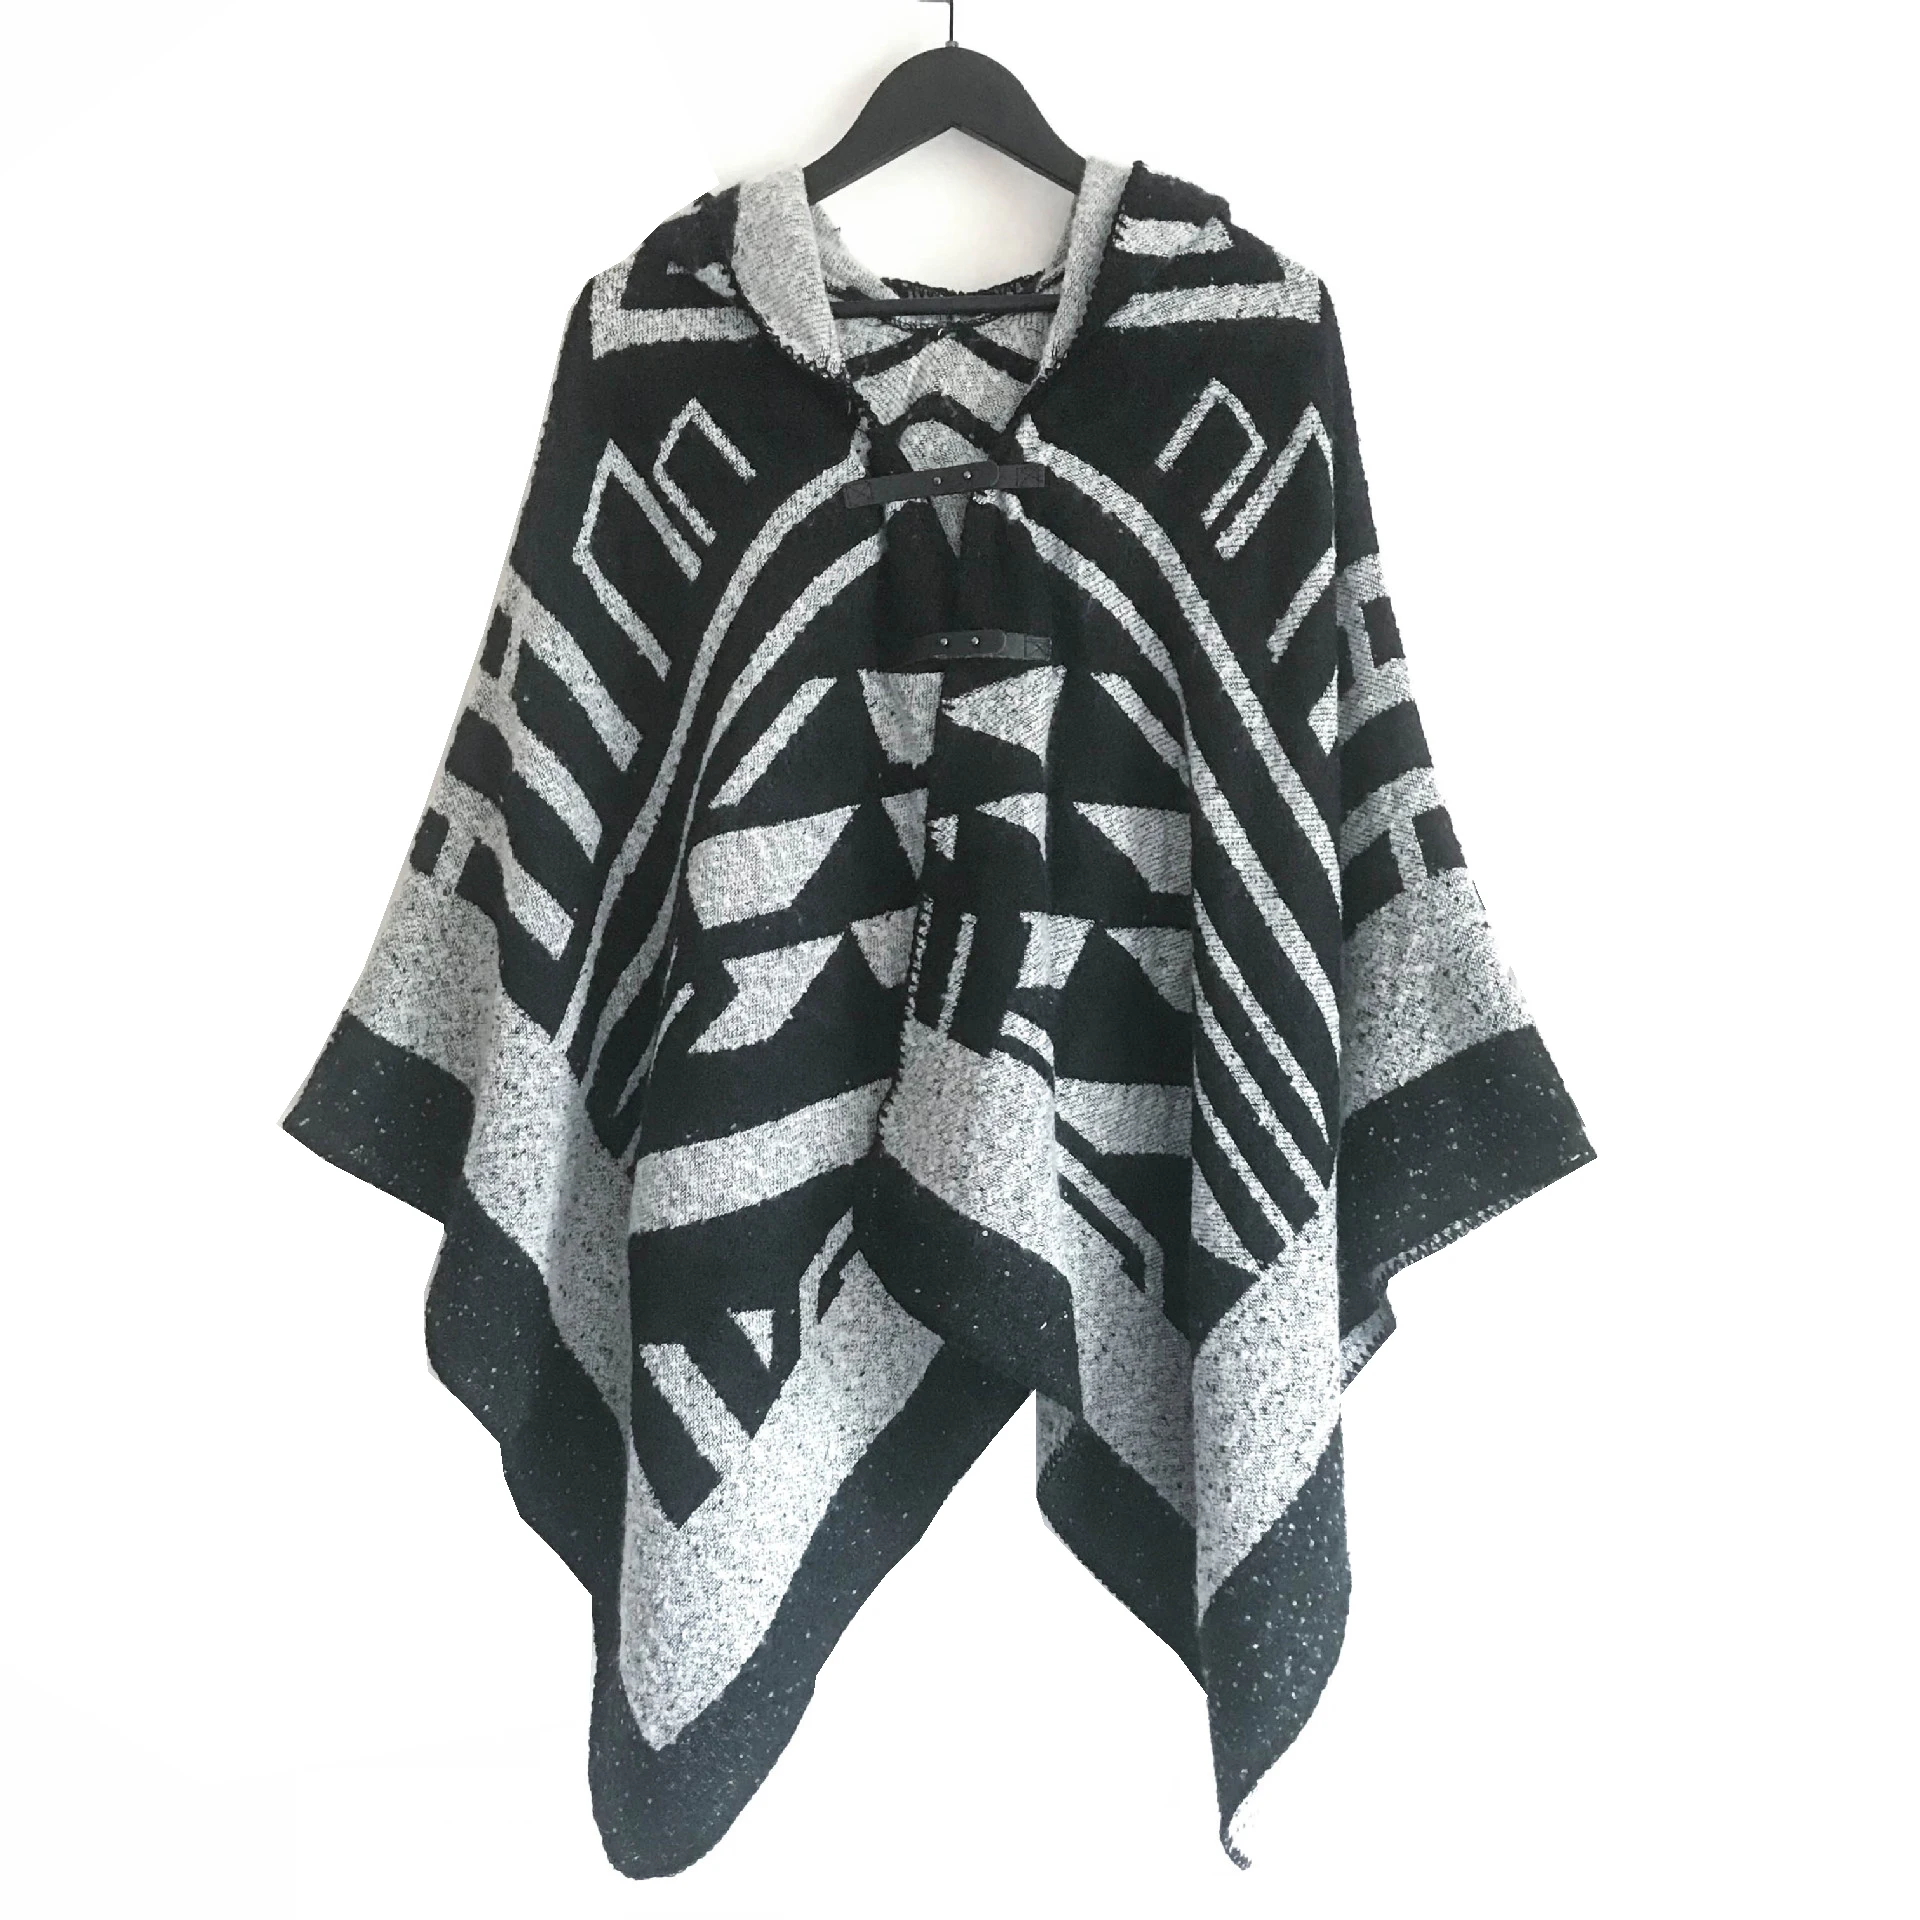 CHENKIO Womens Vintage Boho Knitted Poncho Shawl Cape Button Cardigan with Hood Scarves and Shawls Designer Clothes Women Luxury chenkio womens vintage boho knitted poncho shawl cape button cardigan with hood scarves and shawls designer clothes women luxury